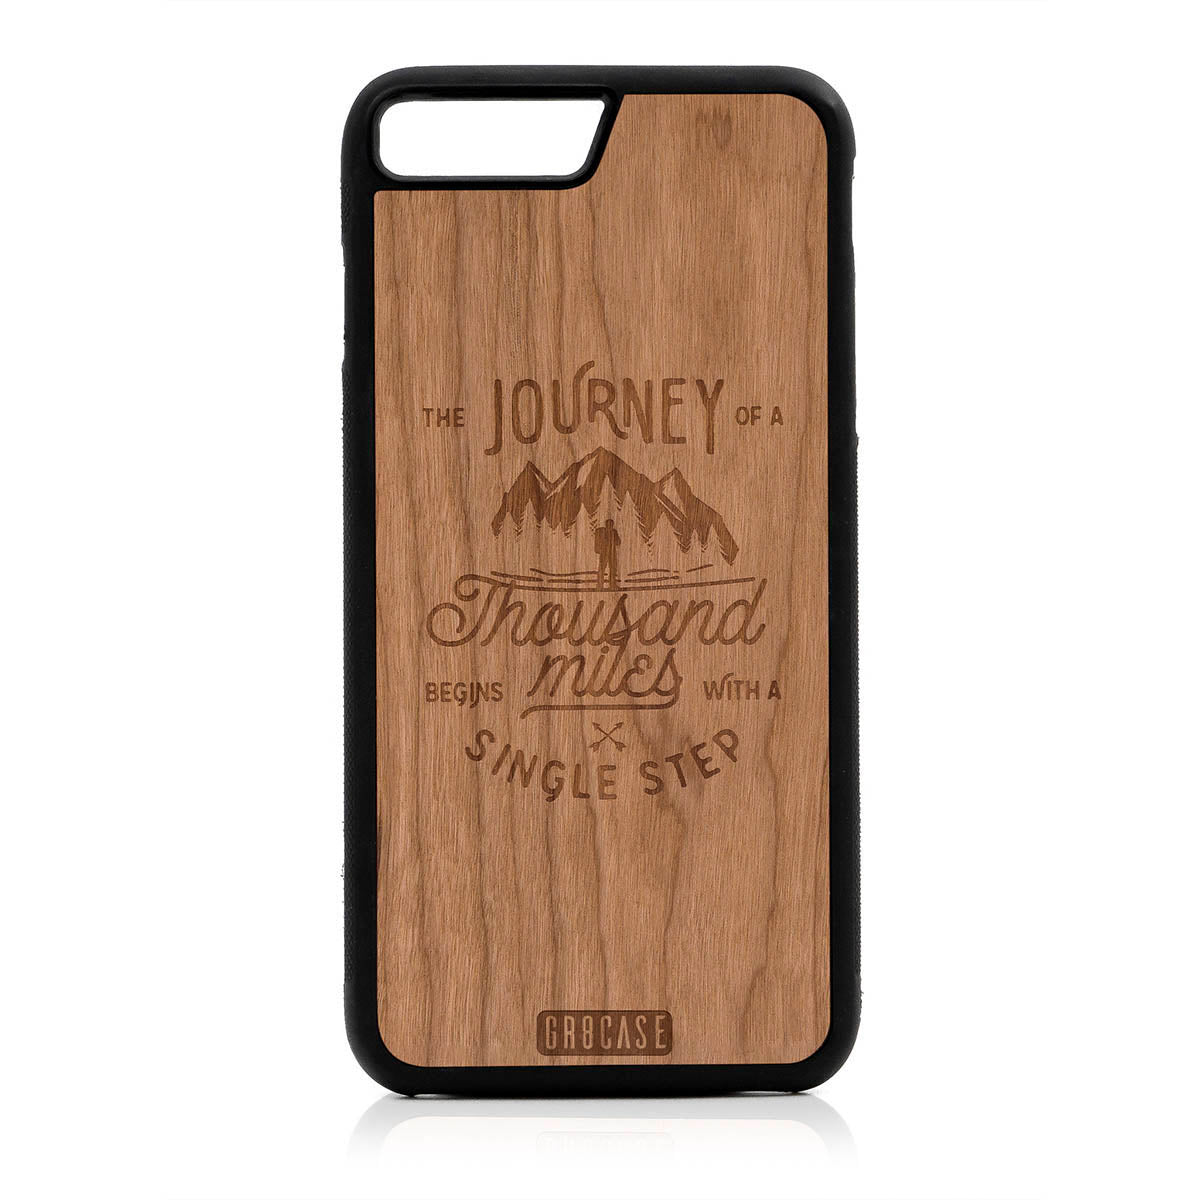 The Journey Of A Thousand Miles Begins With A Single Step Design Wood Case For iPhone 7 Plus / 8 Plus